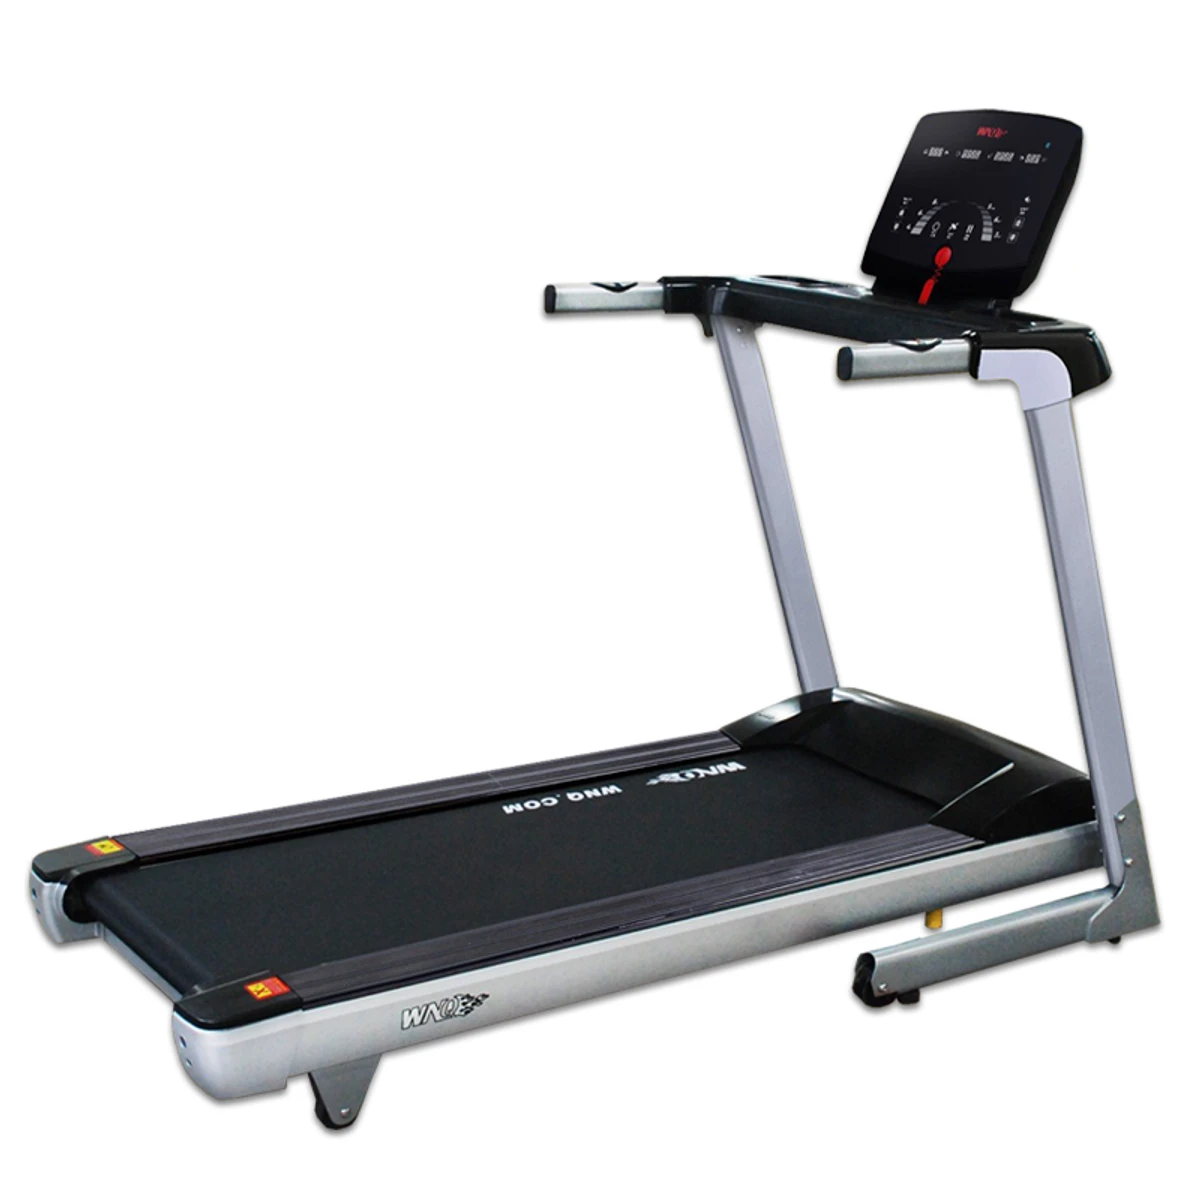 WNQ F1-4000S Home Use Folded Treadmill, Acrylic Touch Screen, Mobile App,Cardio Equipment